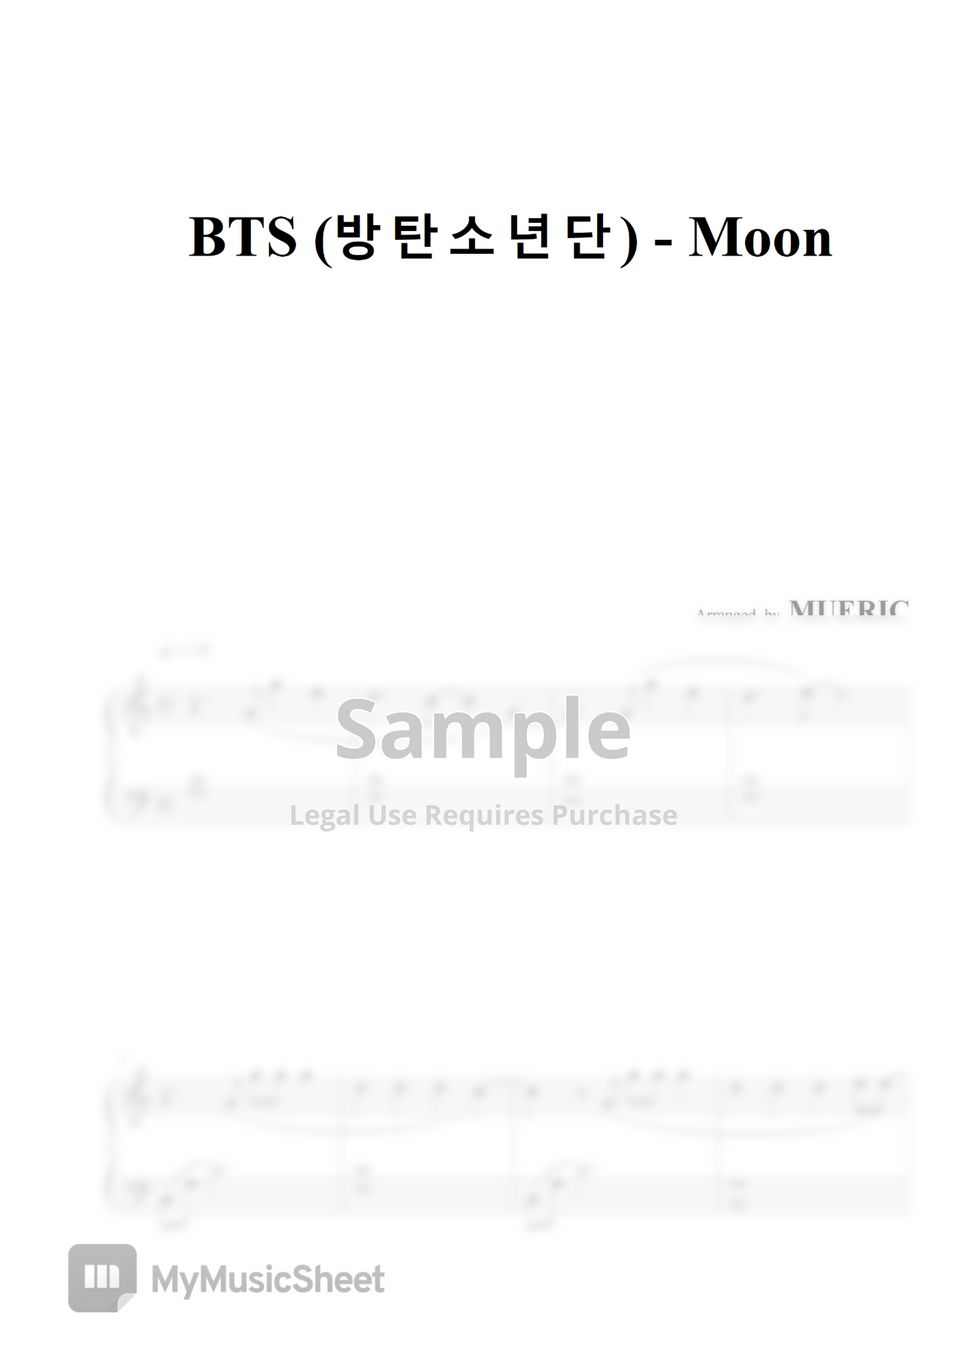 BTS - MOON (Piano ver.) by MUERIC